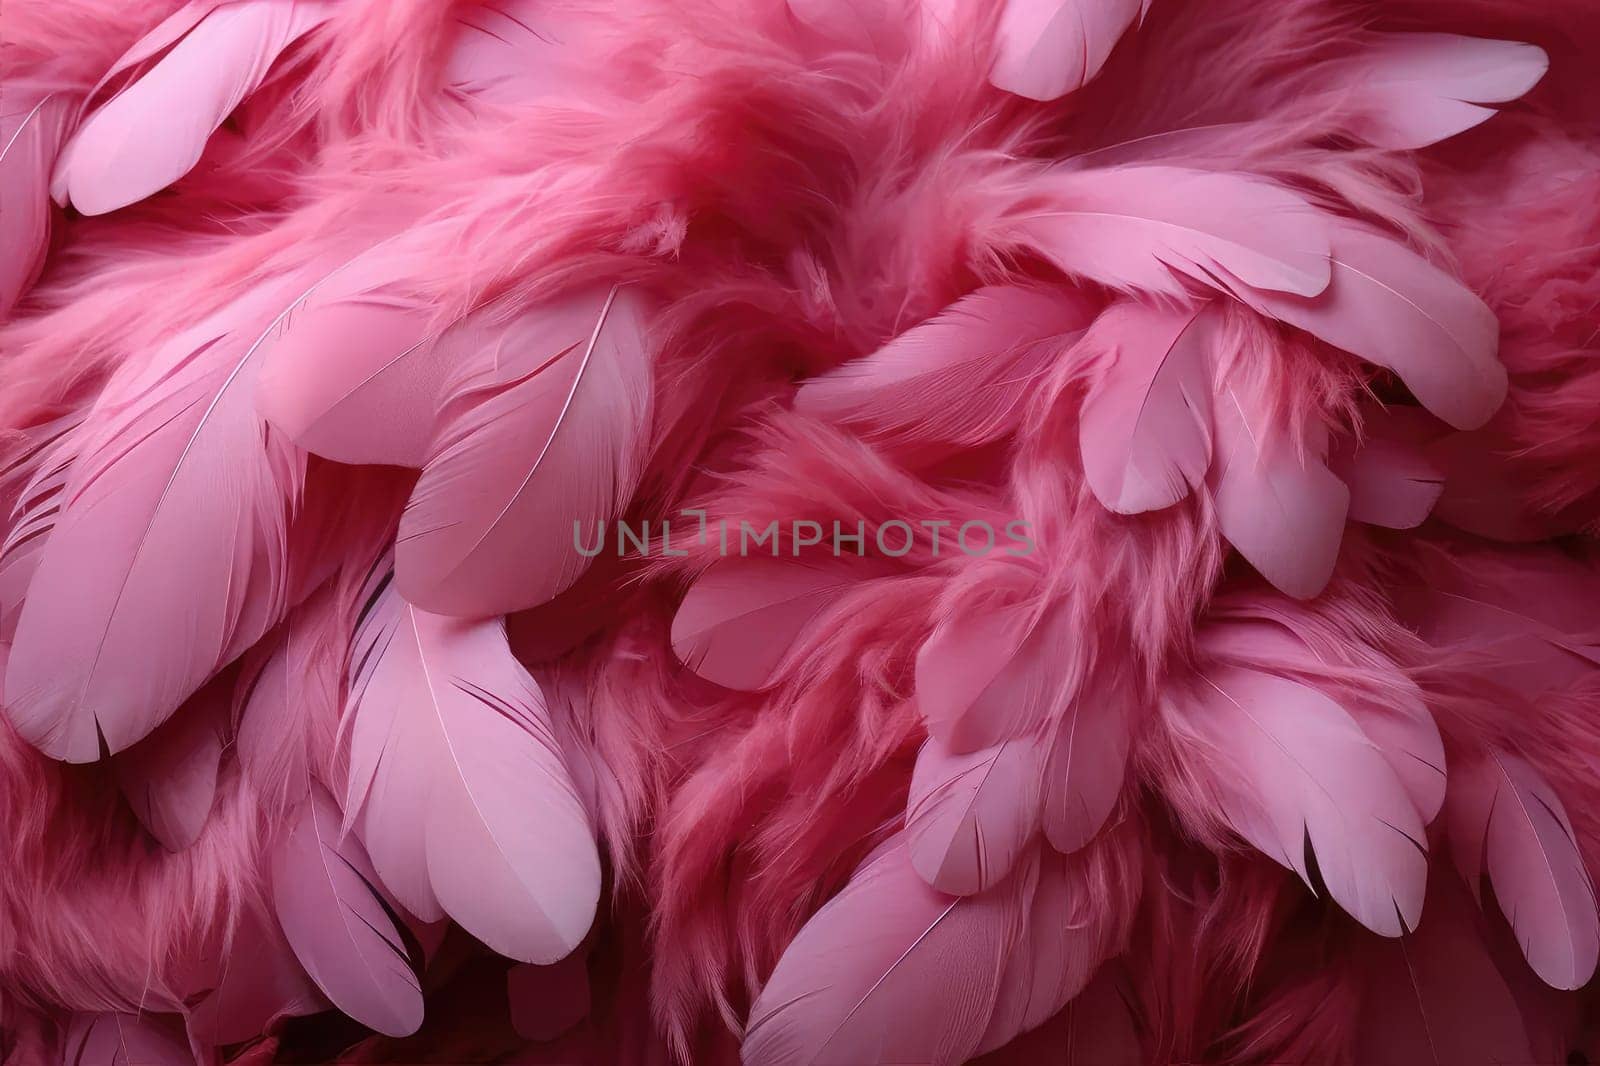 The unique pink bird feathers on the background will captivate your eye and awaken your creative streak.